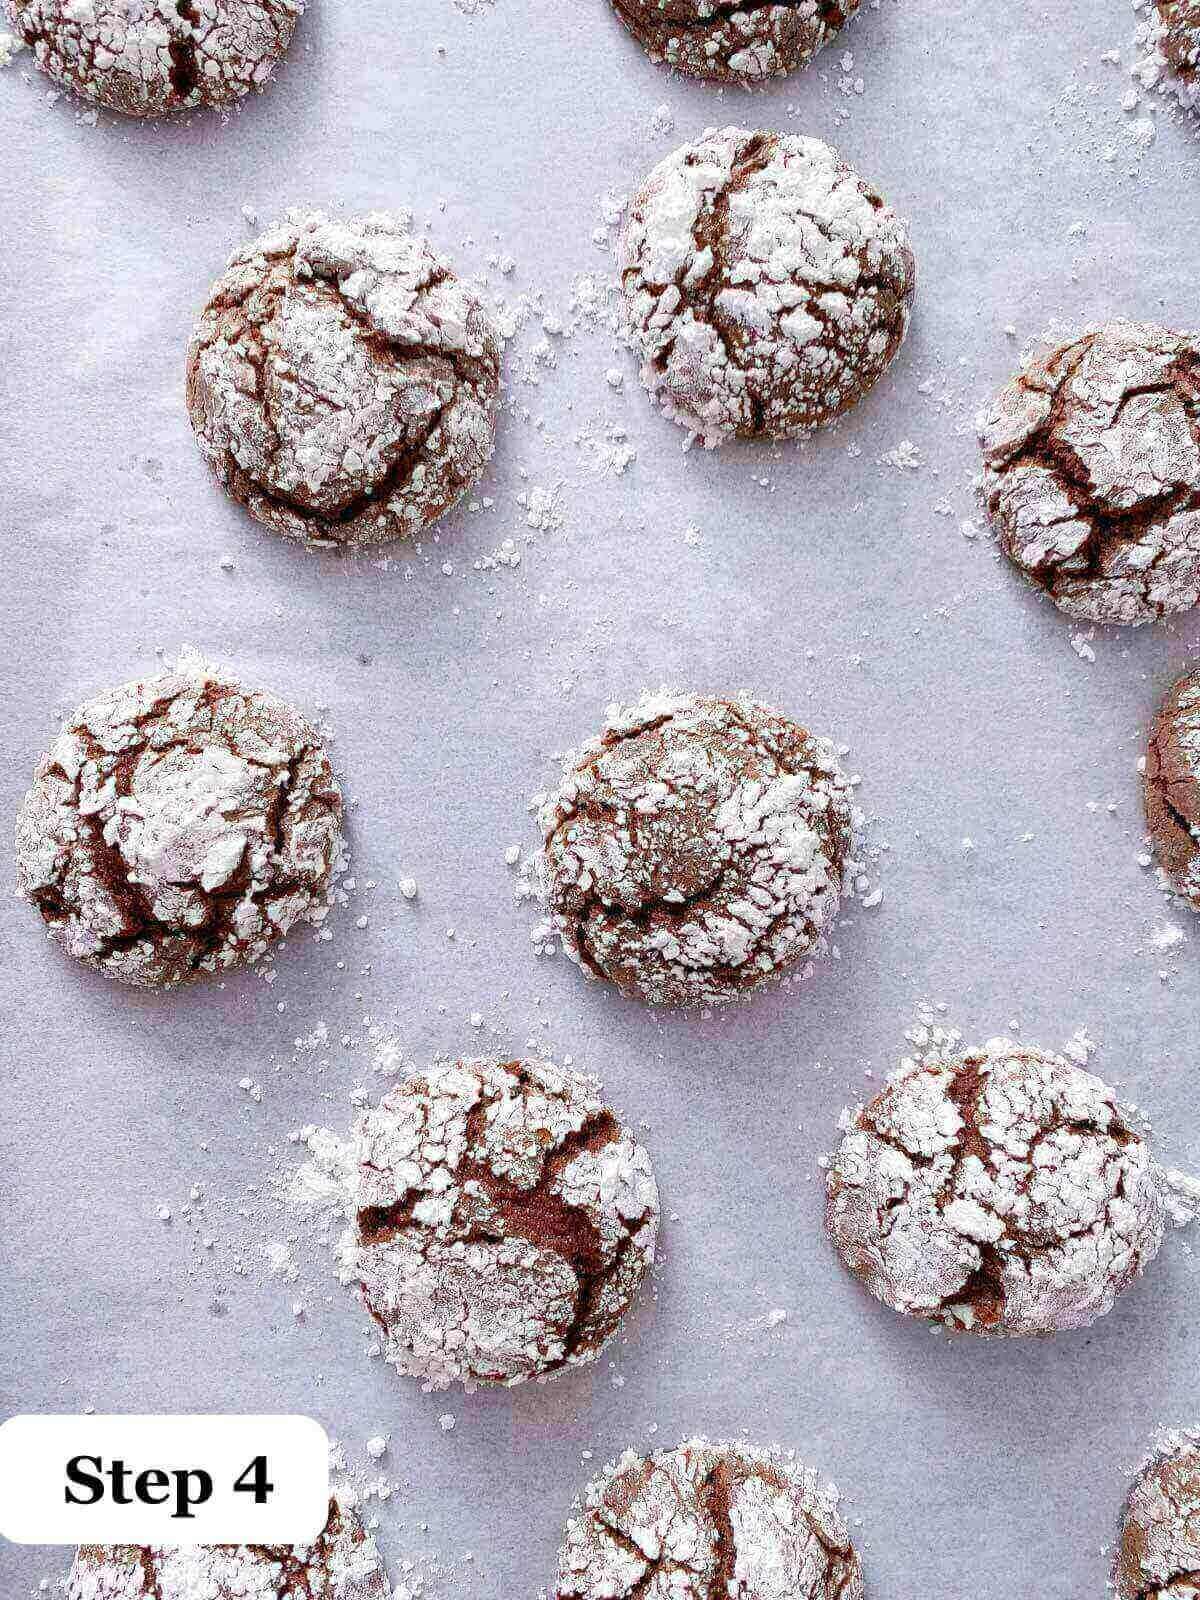 Chocolate crinkle cookies with crackled tops.